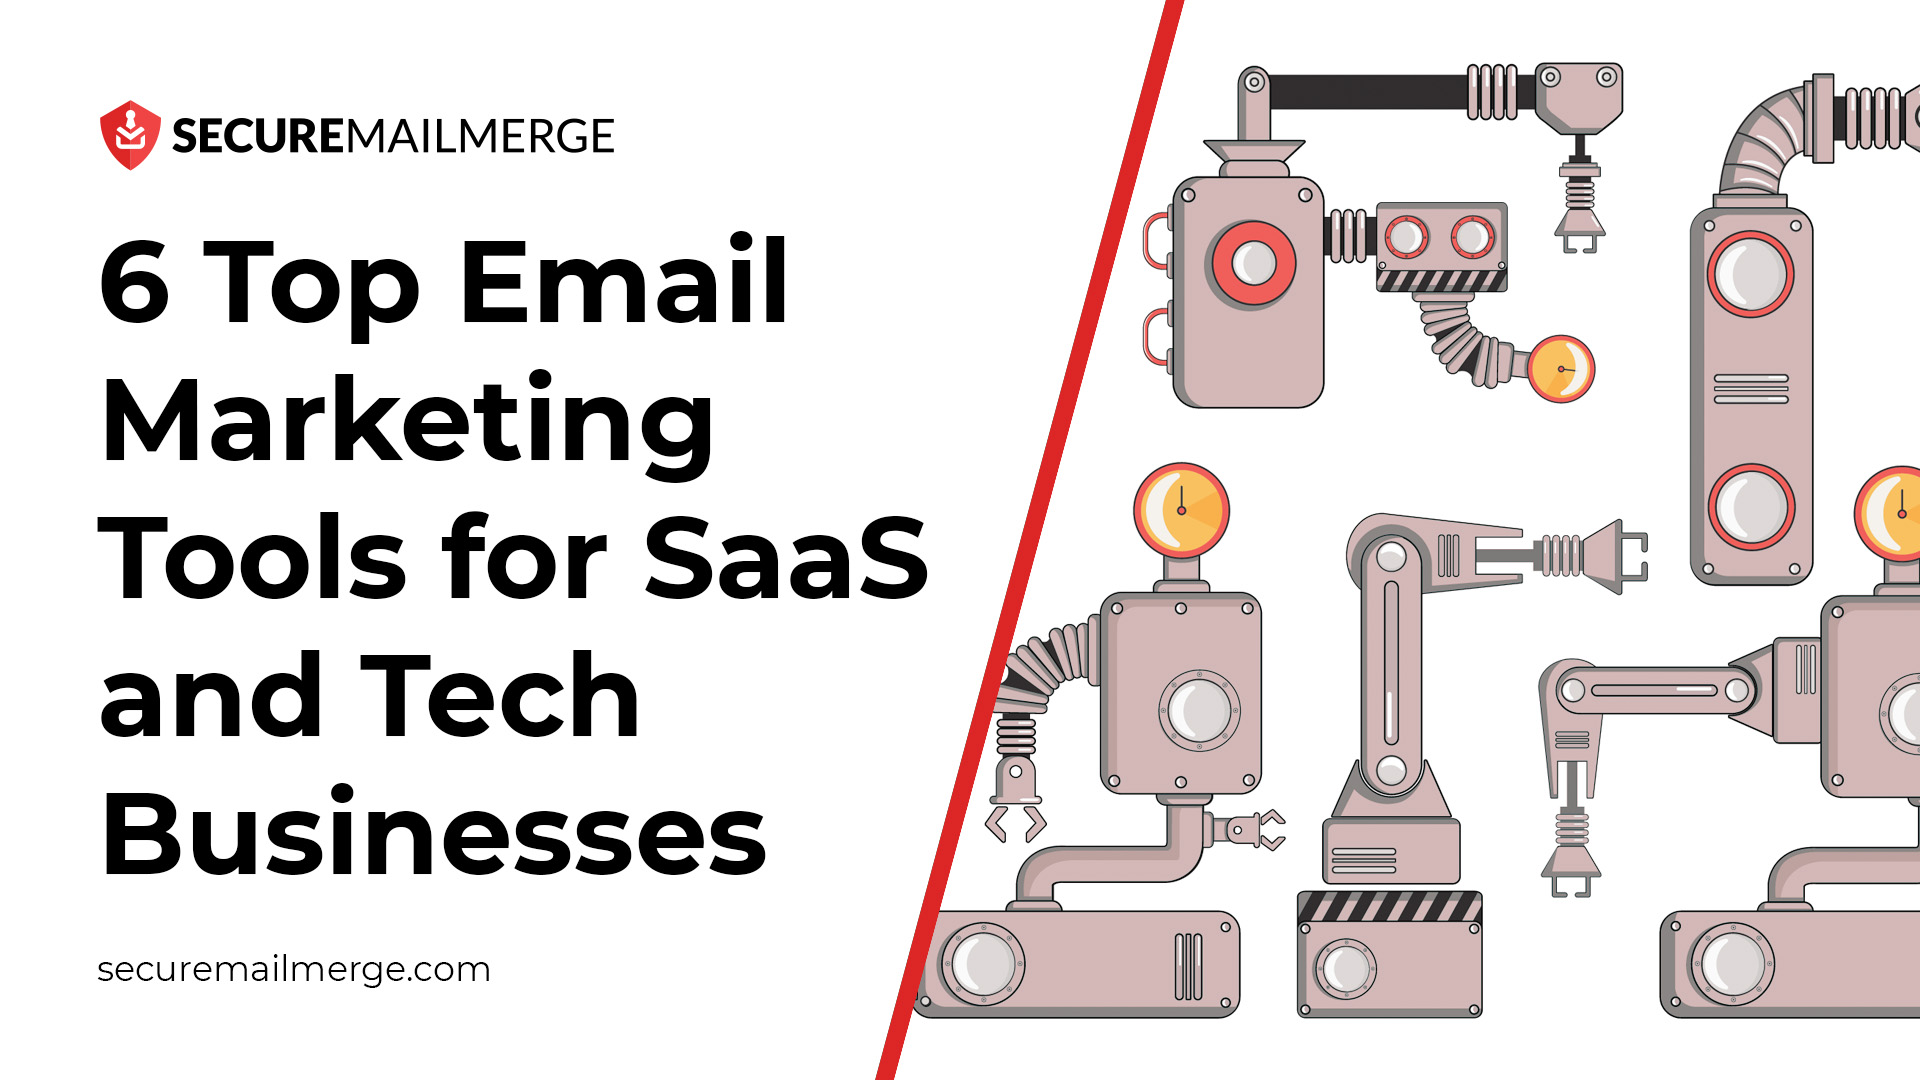 6 Top Email Marketing Tools for SaaS and Tech Businesses